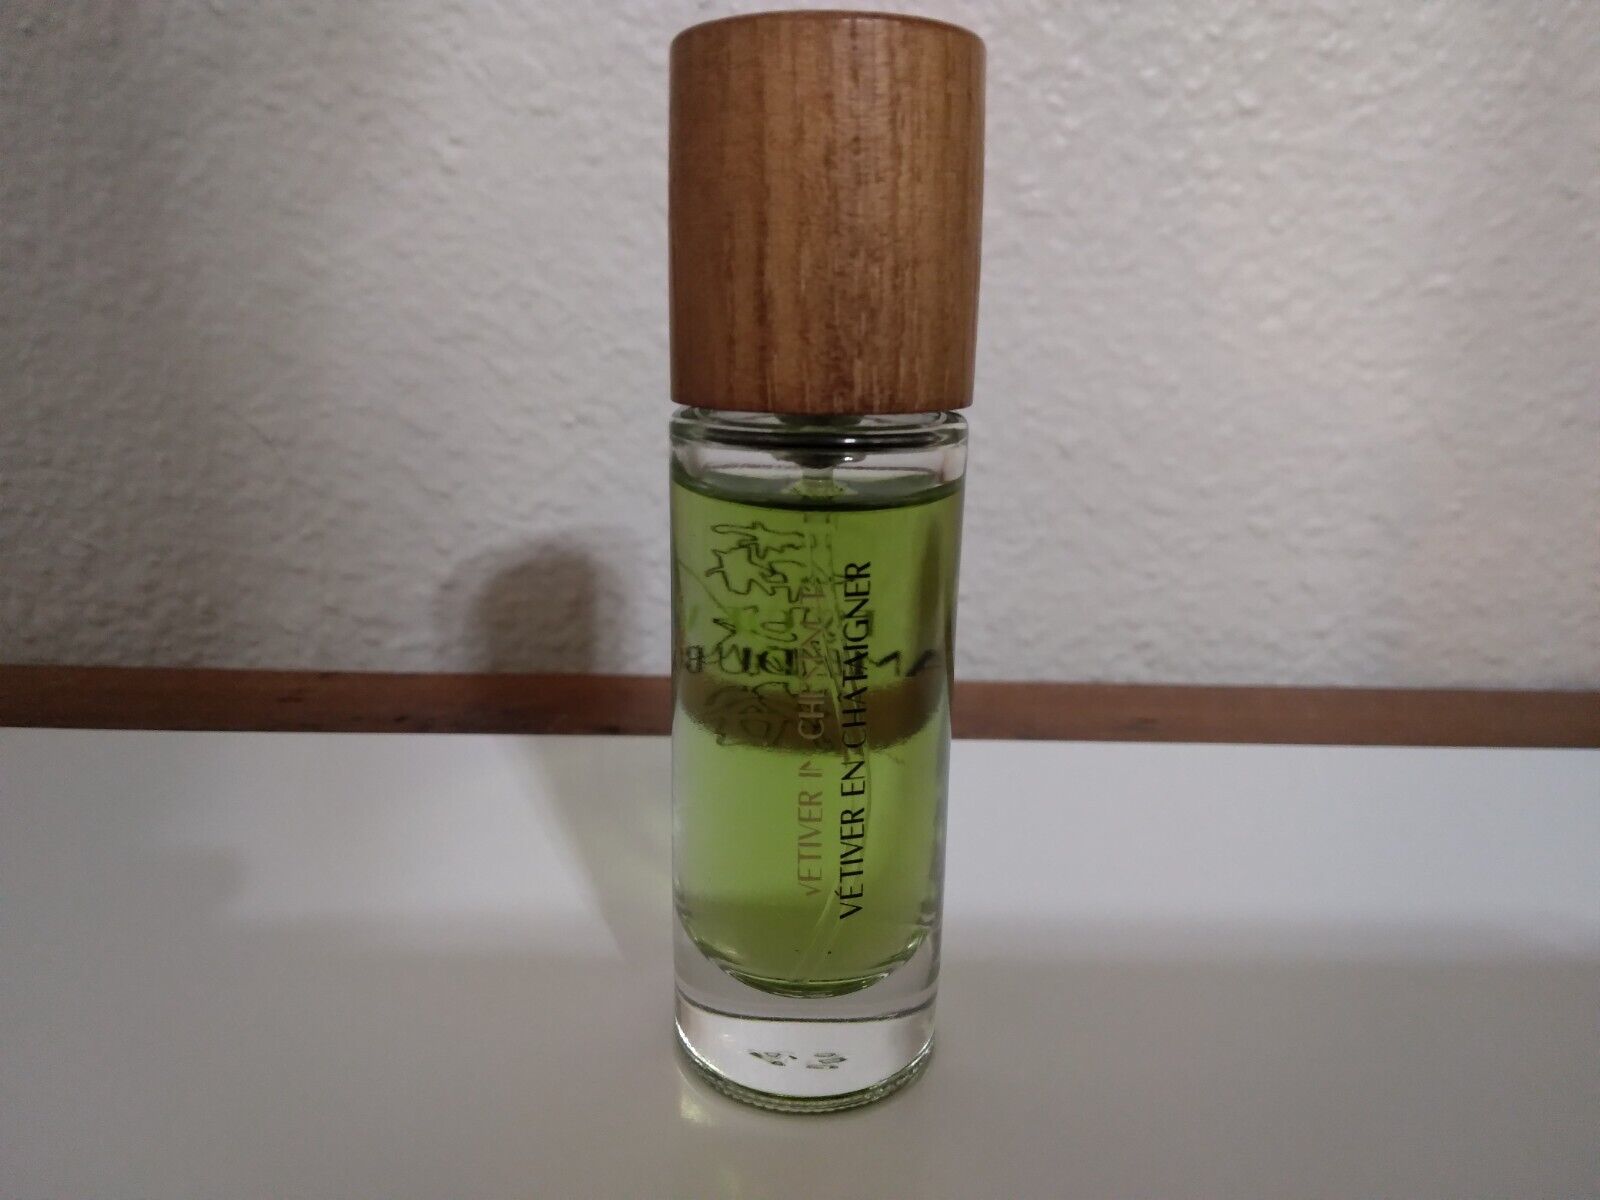 Scents Of Wood Vetiver in Chestnut 10ml Spray